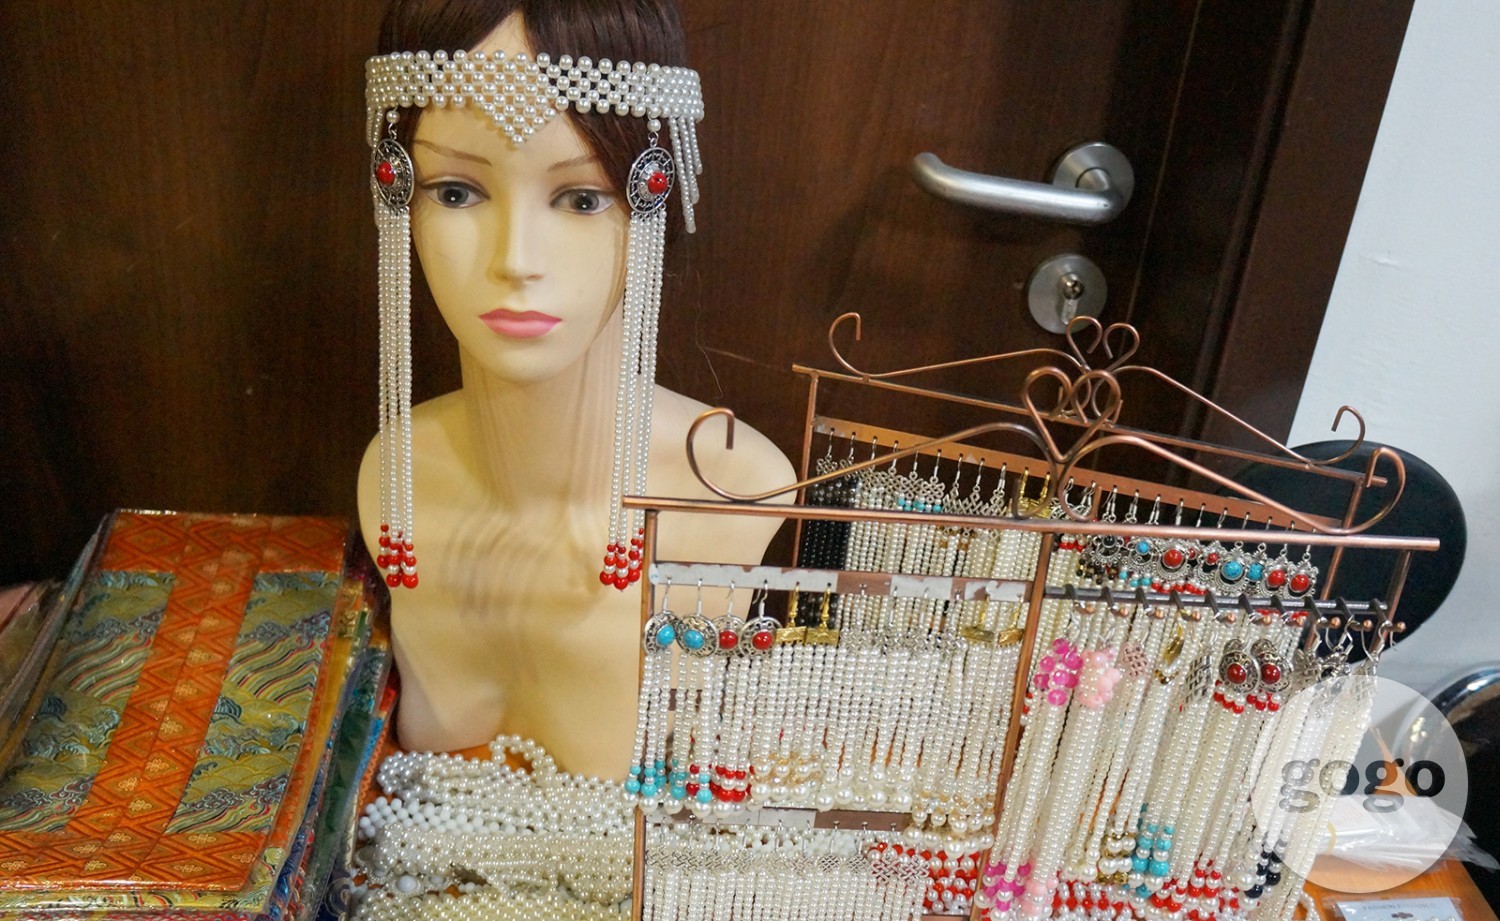 Accessories for children (MNT 20.000-25.000), for adult (MNT 30.000-45.000)